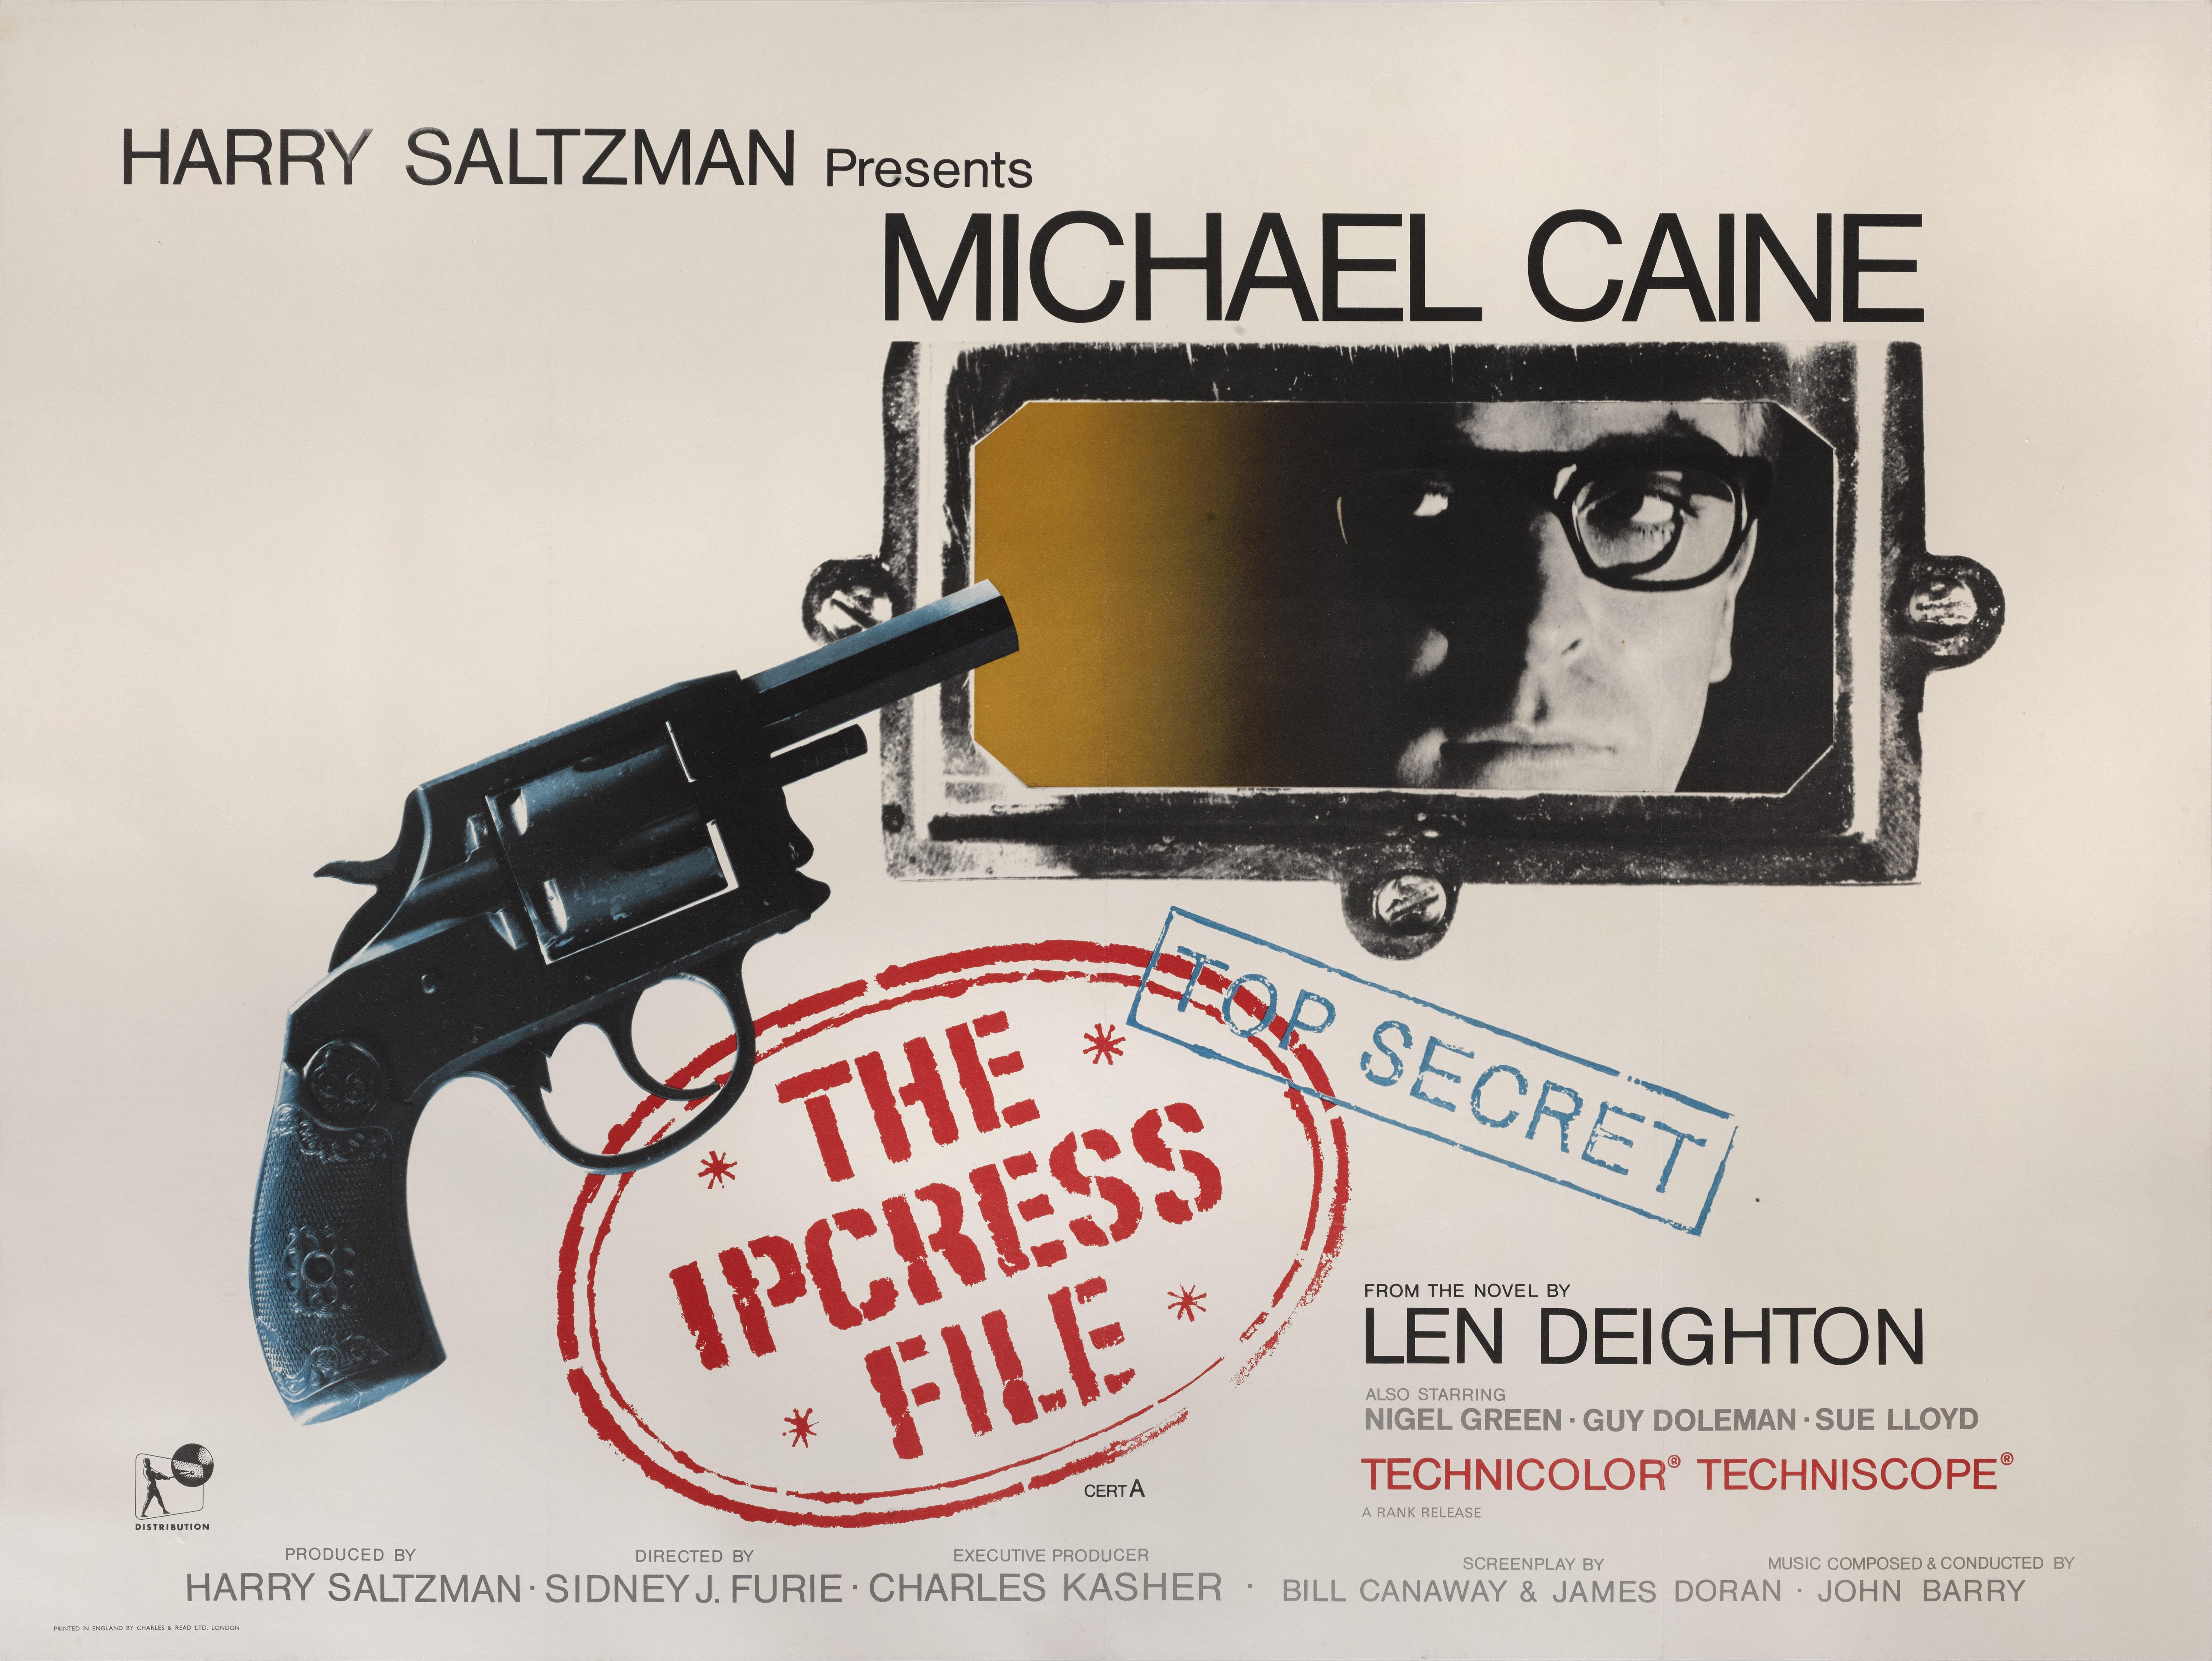 Original British film poster for The Ipcress File 1965.
This British espionage film was directed by Sidney J. Furie, and stars Michael Caine as Harry Palmer, in the first of six films to feature Caine as this character.  This film won a BAFTA award